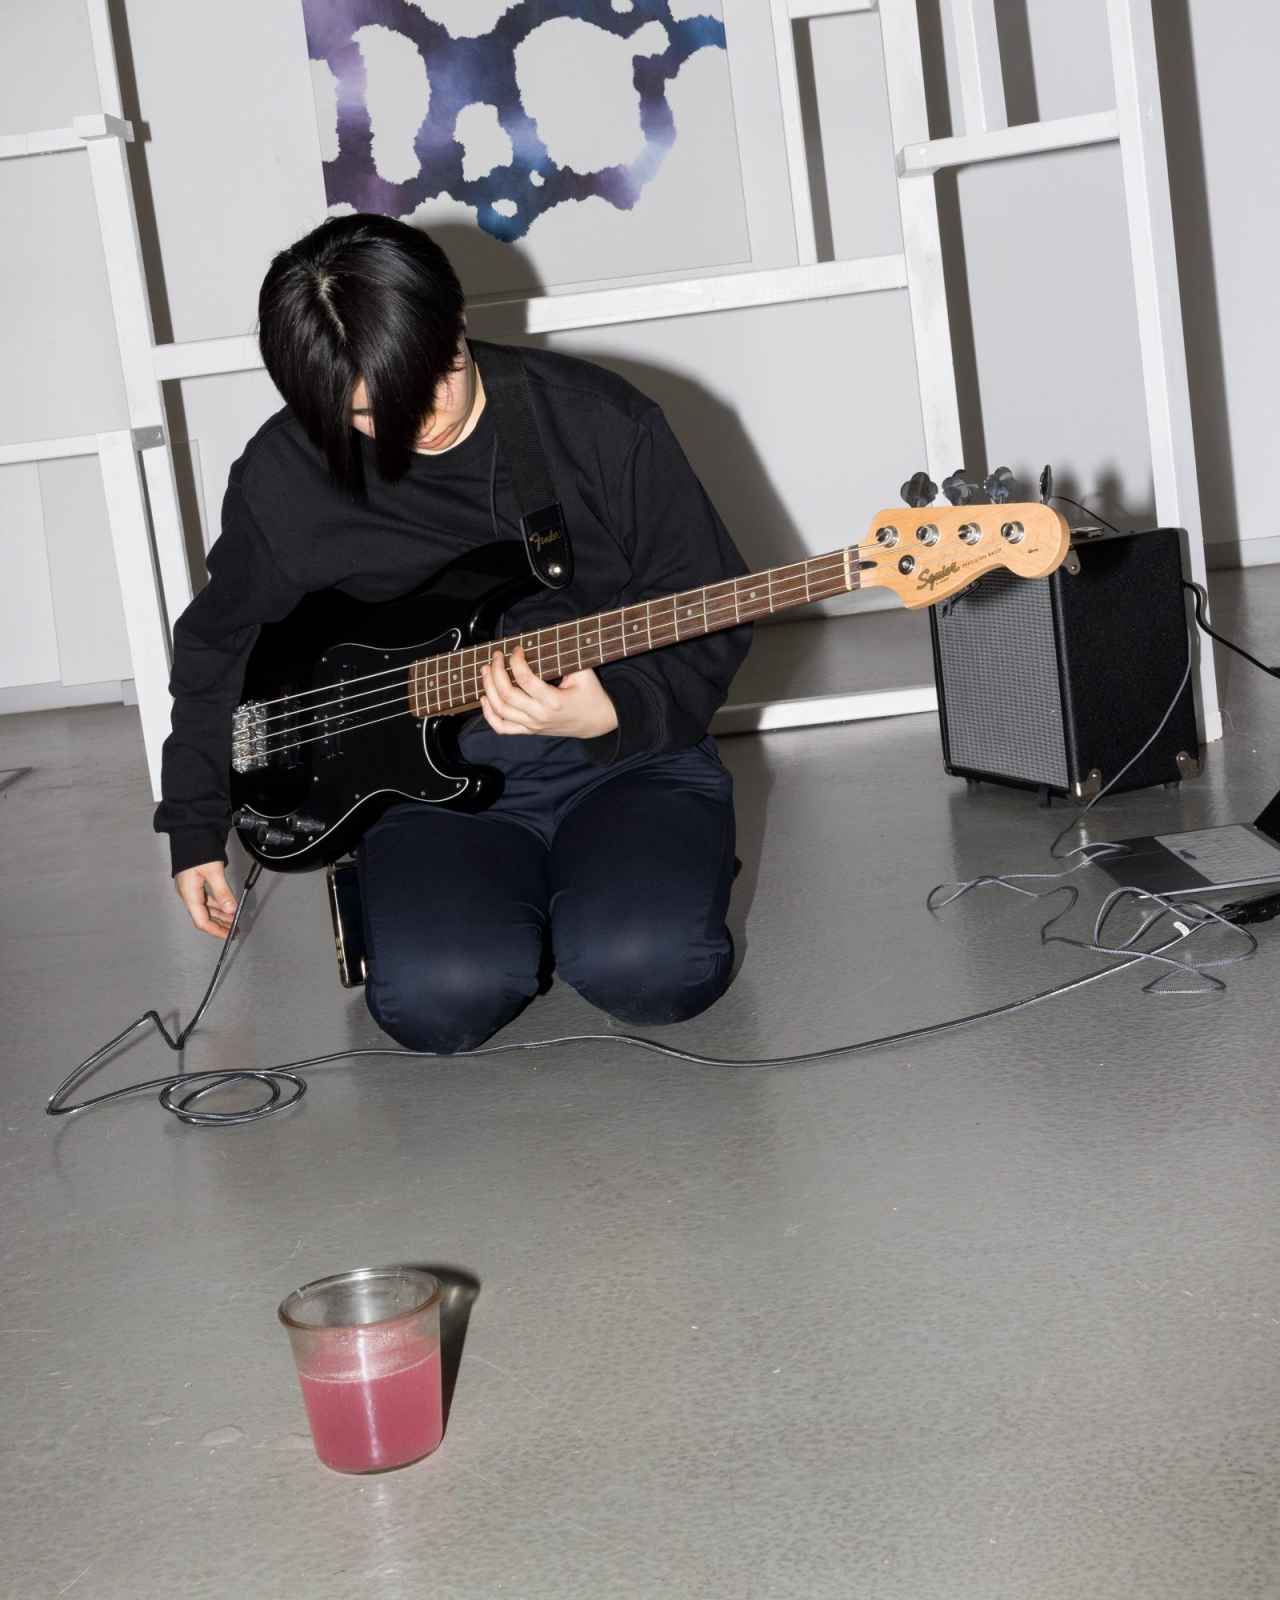 an individual playing a bass guitar while kneeling on the floor and a jar filled with liquid in the foreground